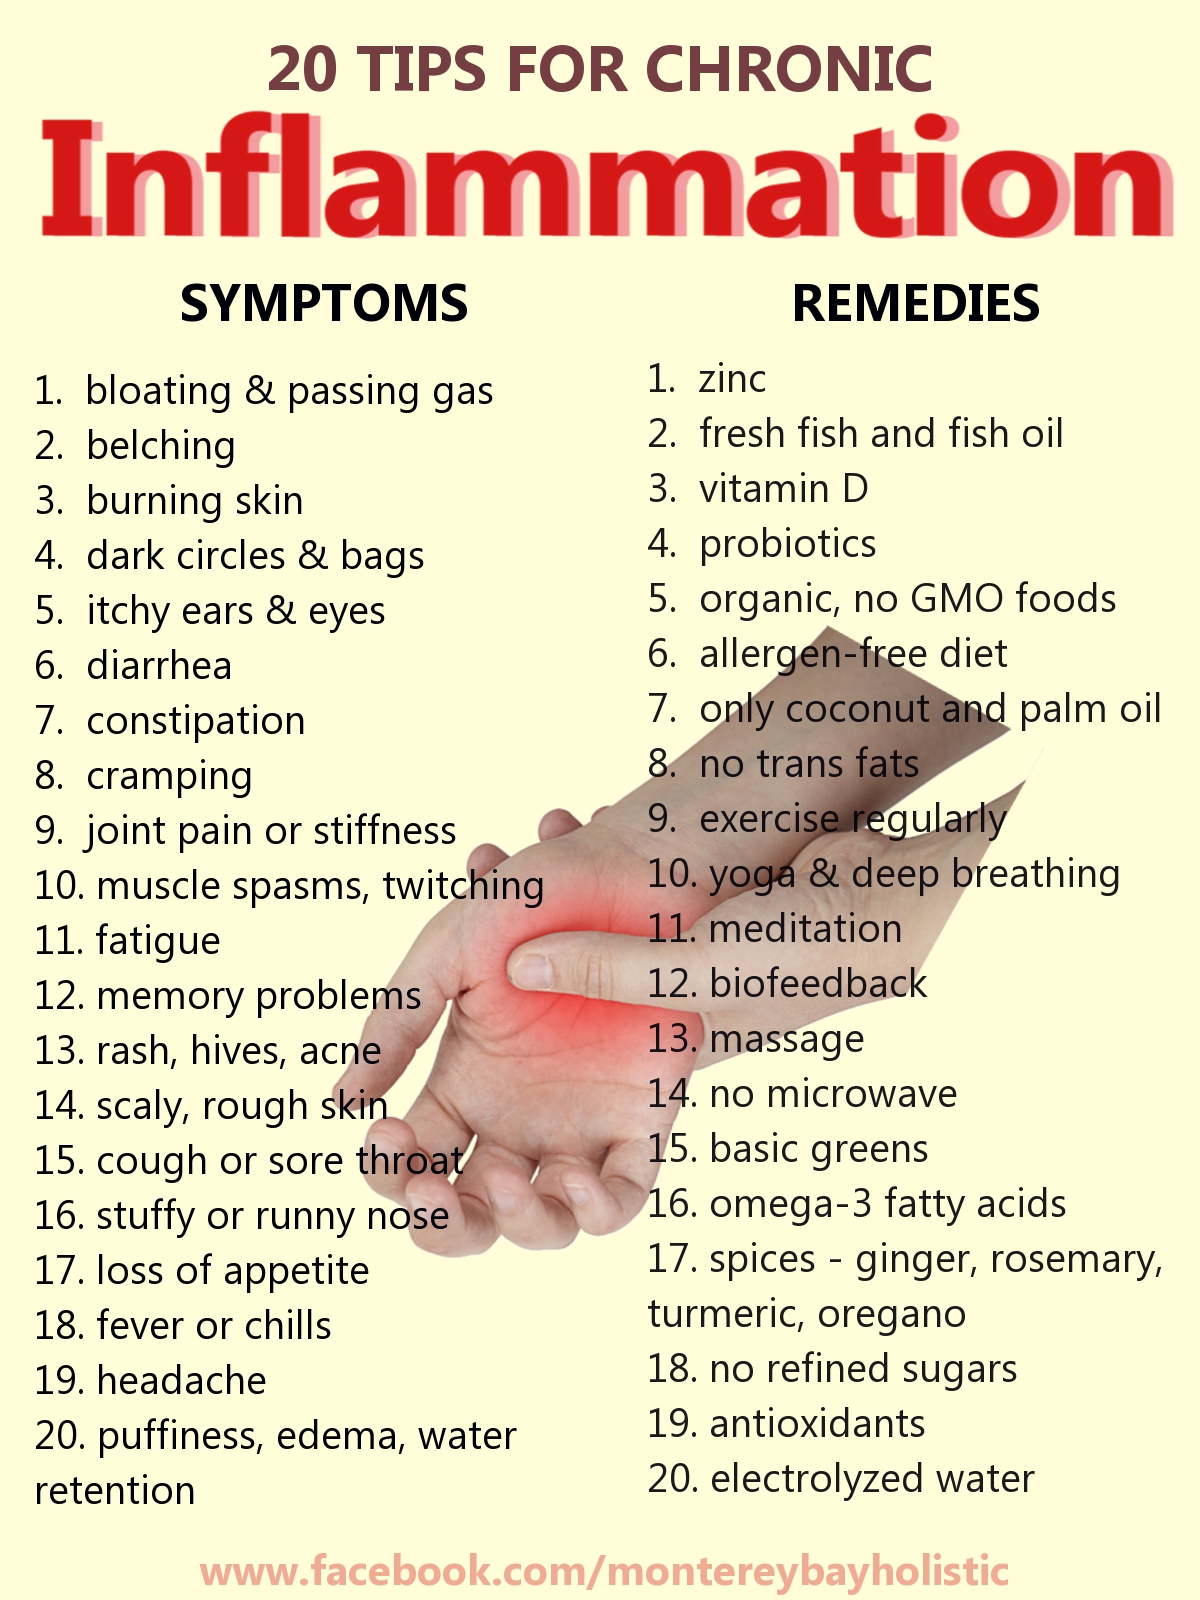 What are some foods that reduce inflammation?